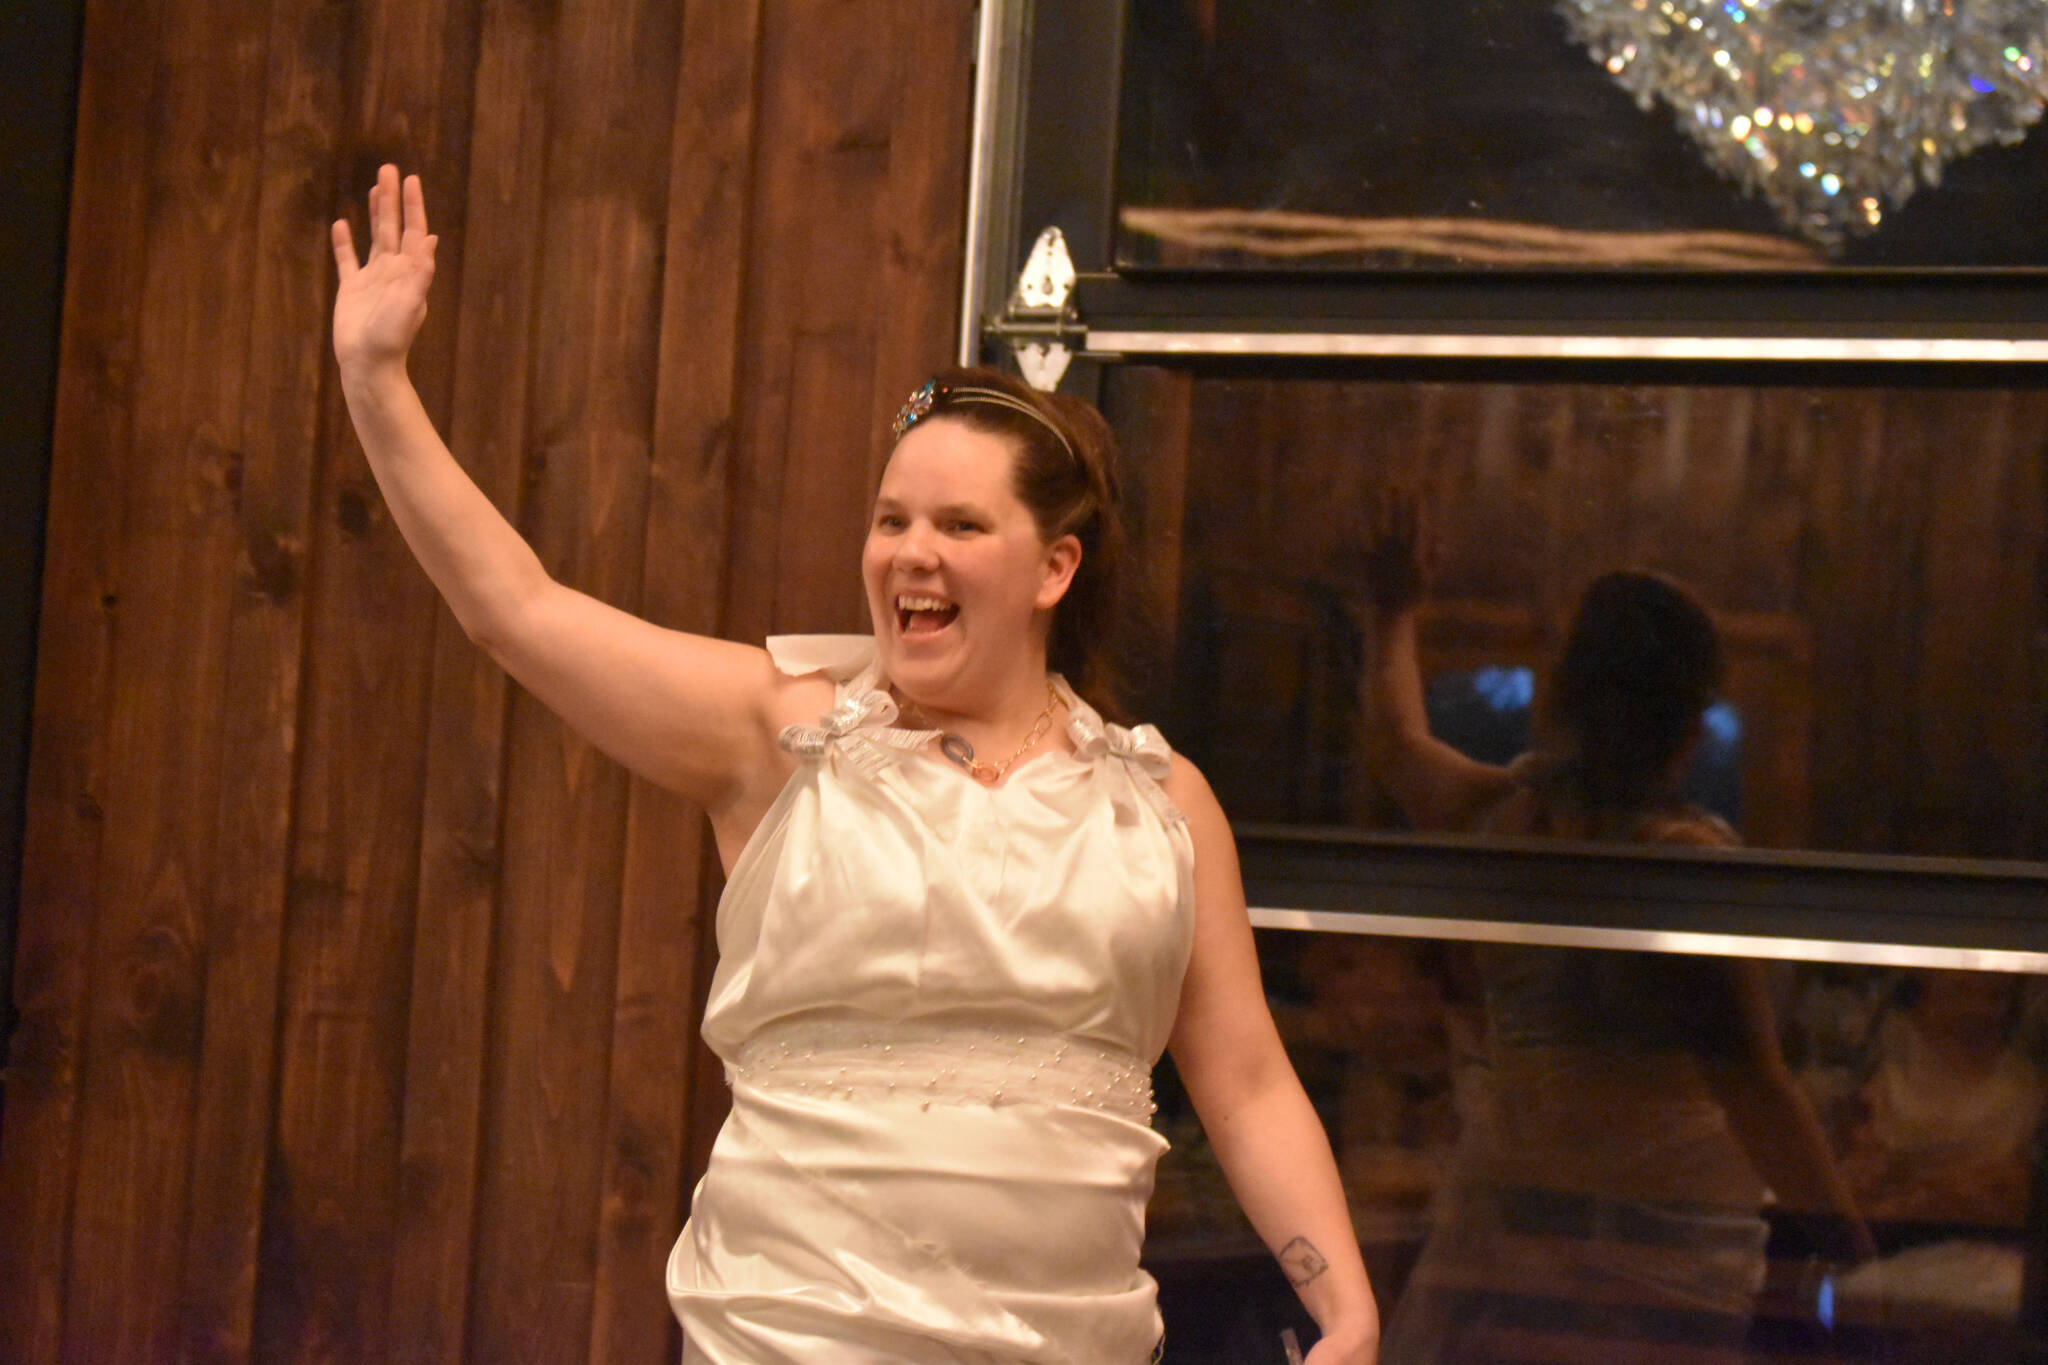 Samantha Pyfer appears as Bride DIY during her presentation to the sharks at the Spark Soldotna Shark Tank Event on Friday, Nov. 18, 2022, at The Lone Moose Lodge in Soldotna, Alaska. (Jake Dye/Peninsula Clarion)